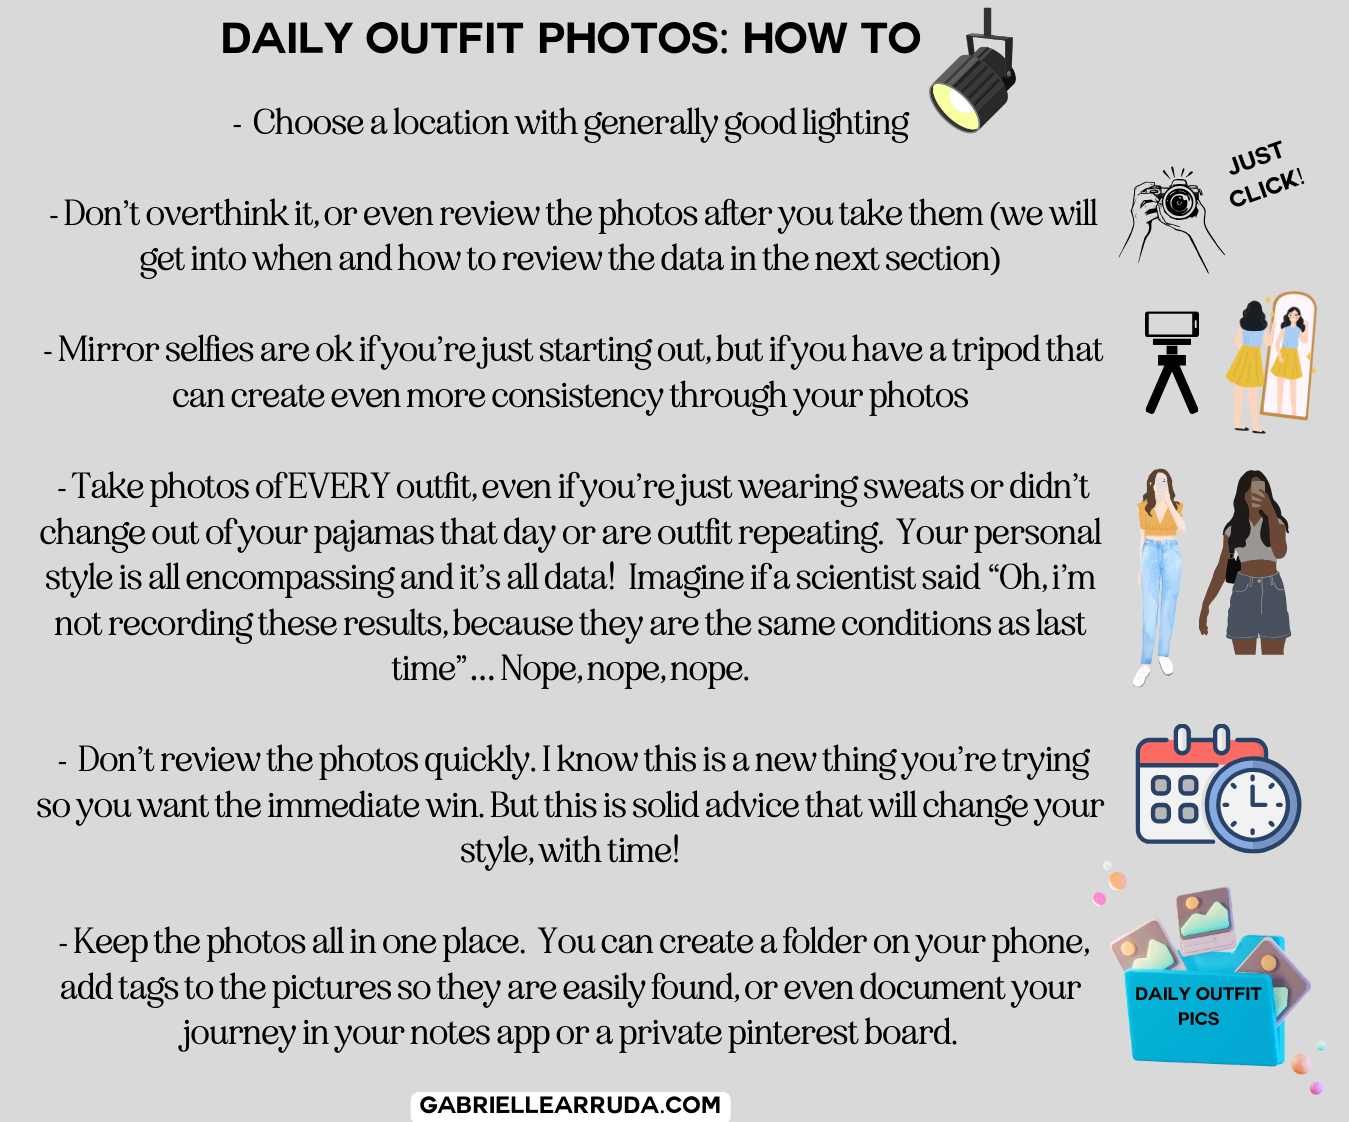 daily outfit photos check list / tips